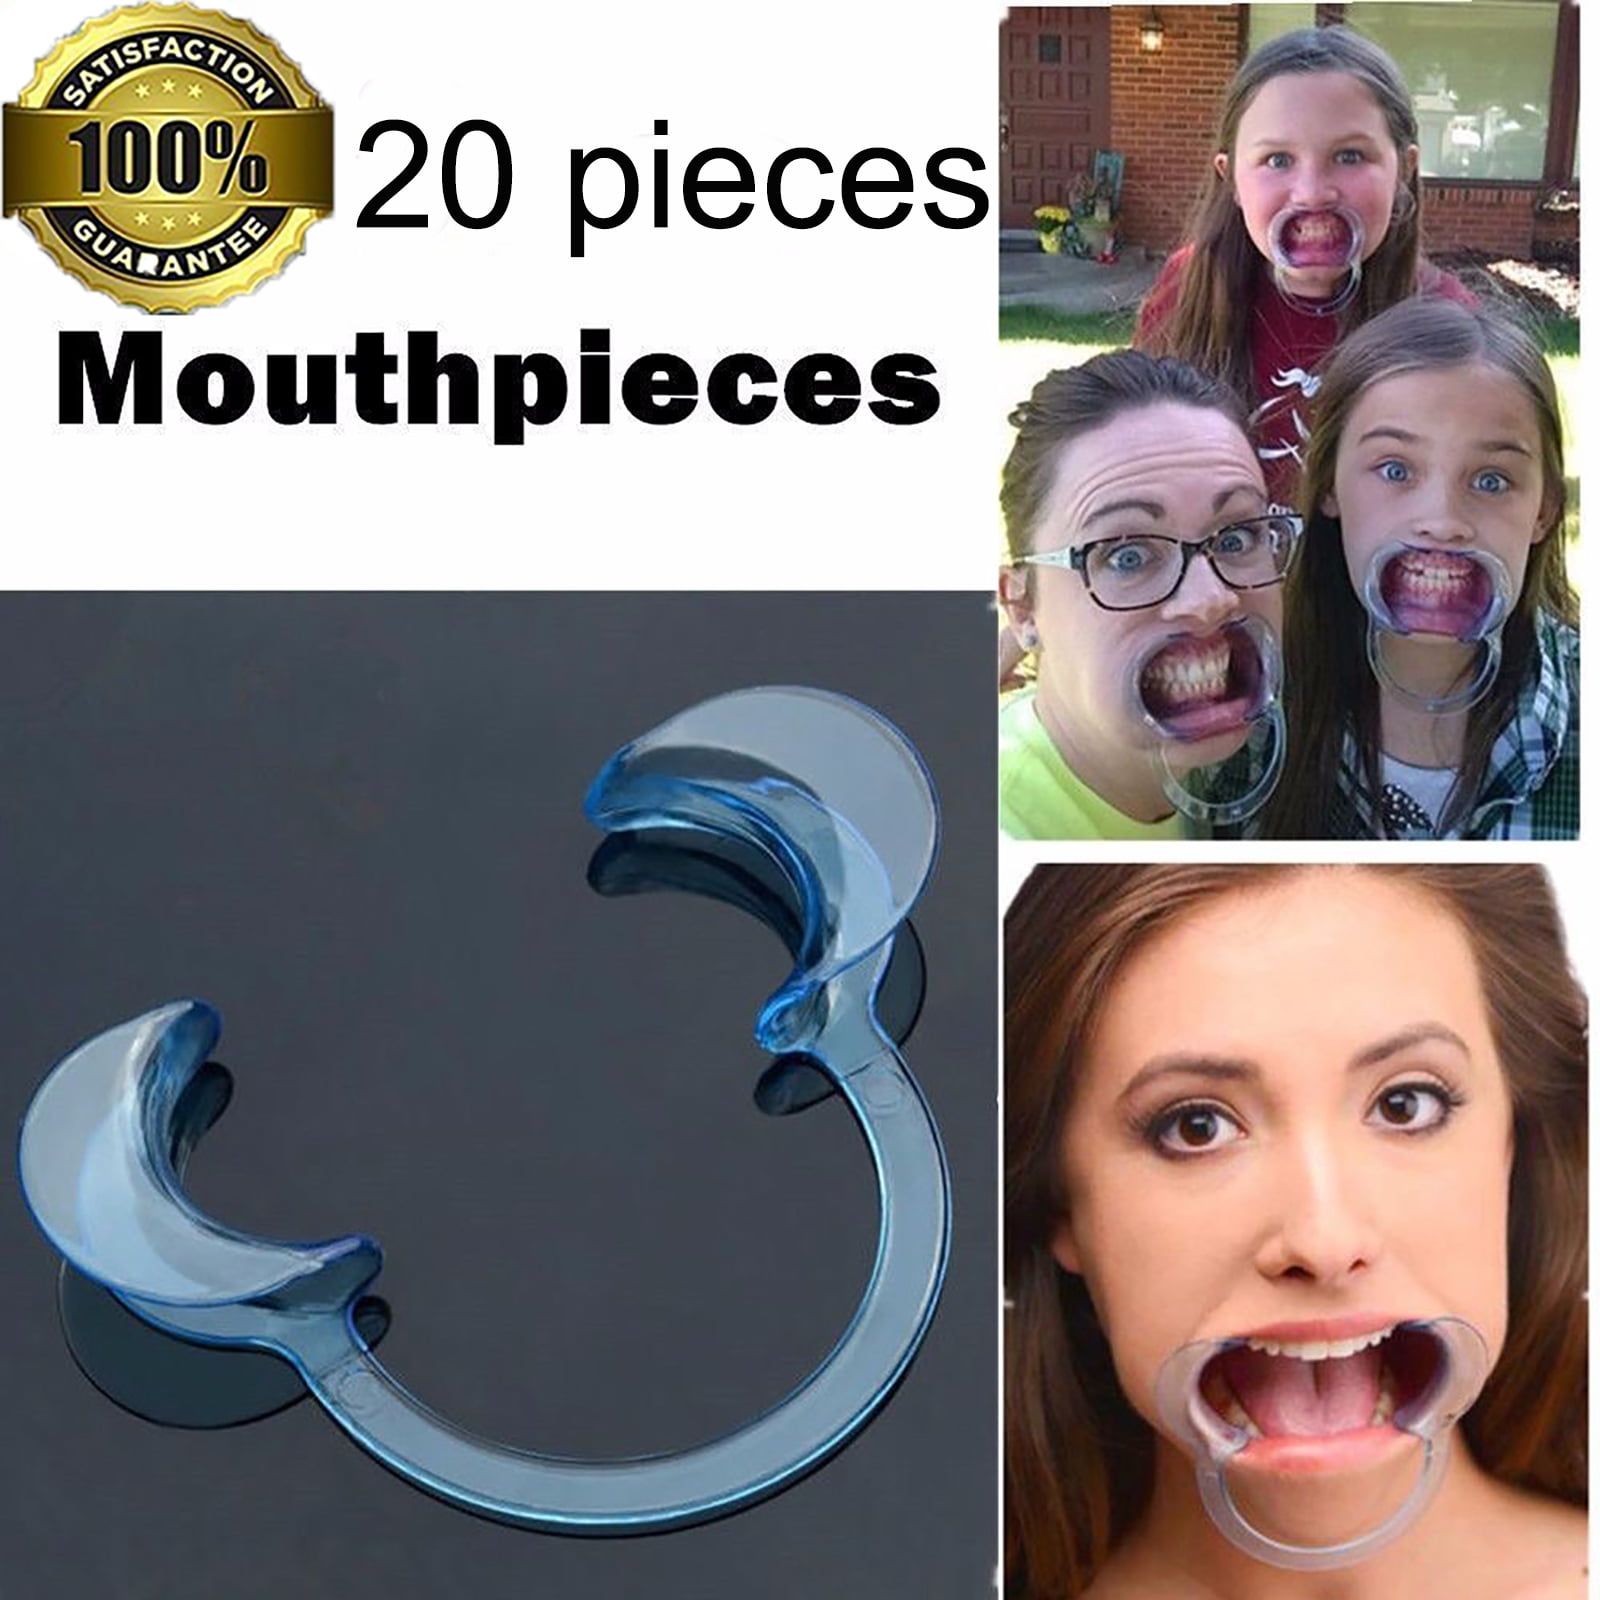 10pcs Speak Out Replacement Mouthpieces Board Game Mouth Guard M 